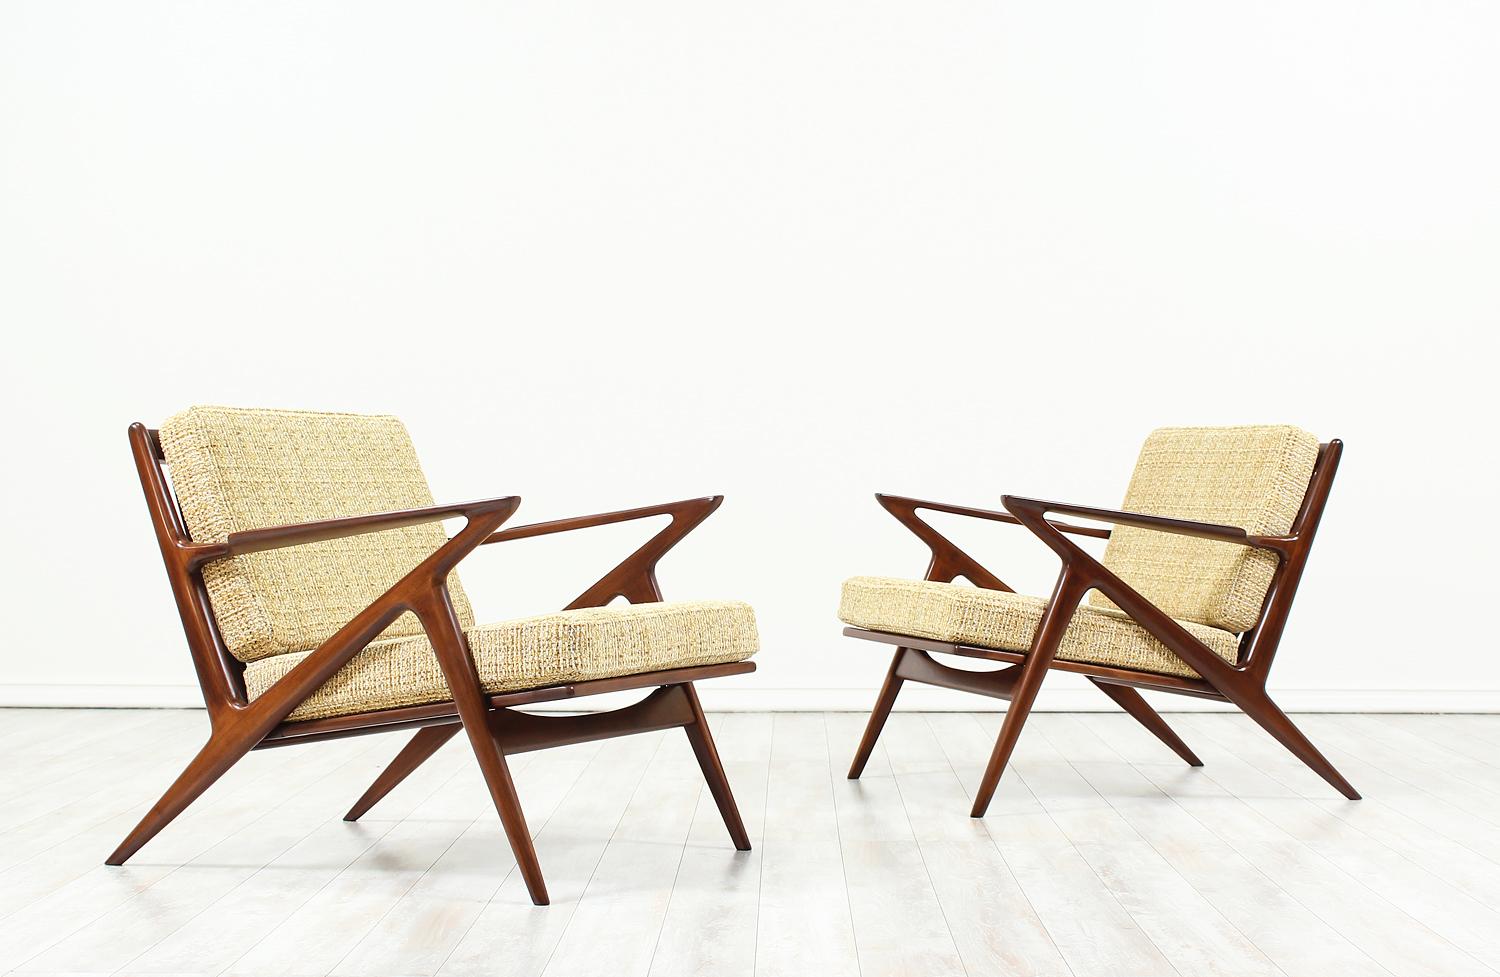 A pair of classic lounge chairs designed by Poul Jensen for Selig in Denmark circa 1960s. Known as the “Z” lounge chair for its signature armrests that connect to the legs, which resembles the letter Z. This iconic pair features a solid